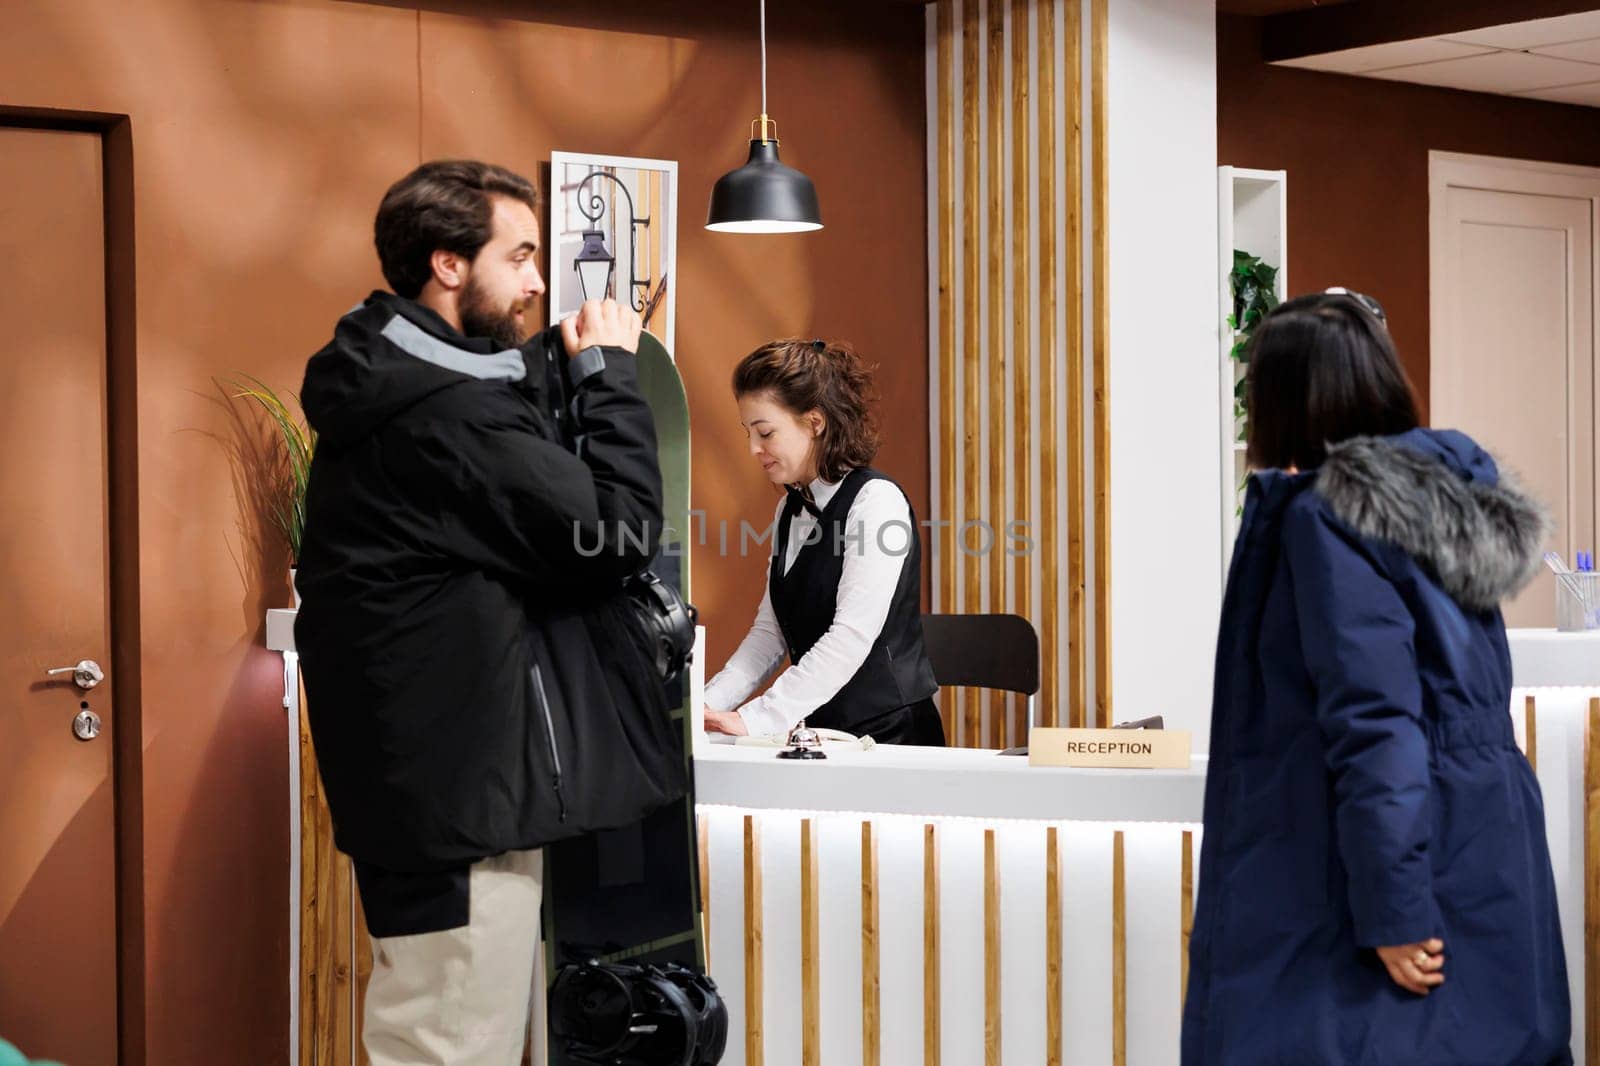 Youthful man and woman at front desk being assisted with check-in by friendly hotel receptionist. Male tourist holding snowboard while female speaks with employee in resort lounge area.